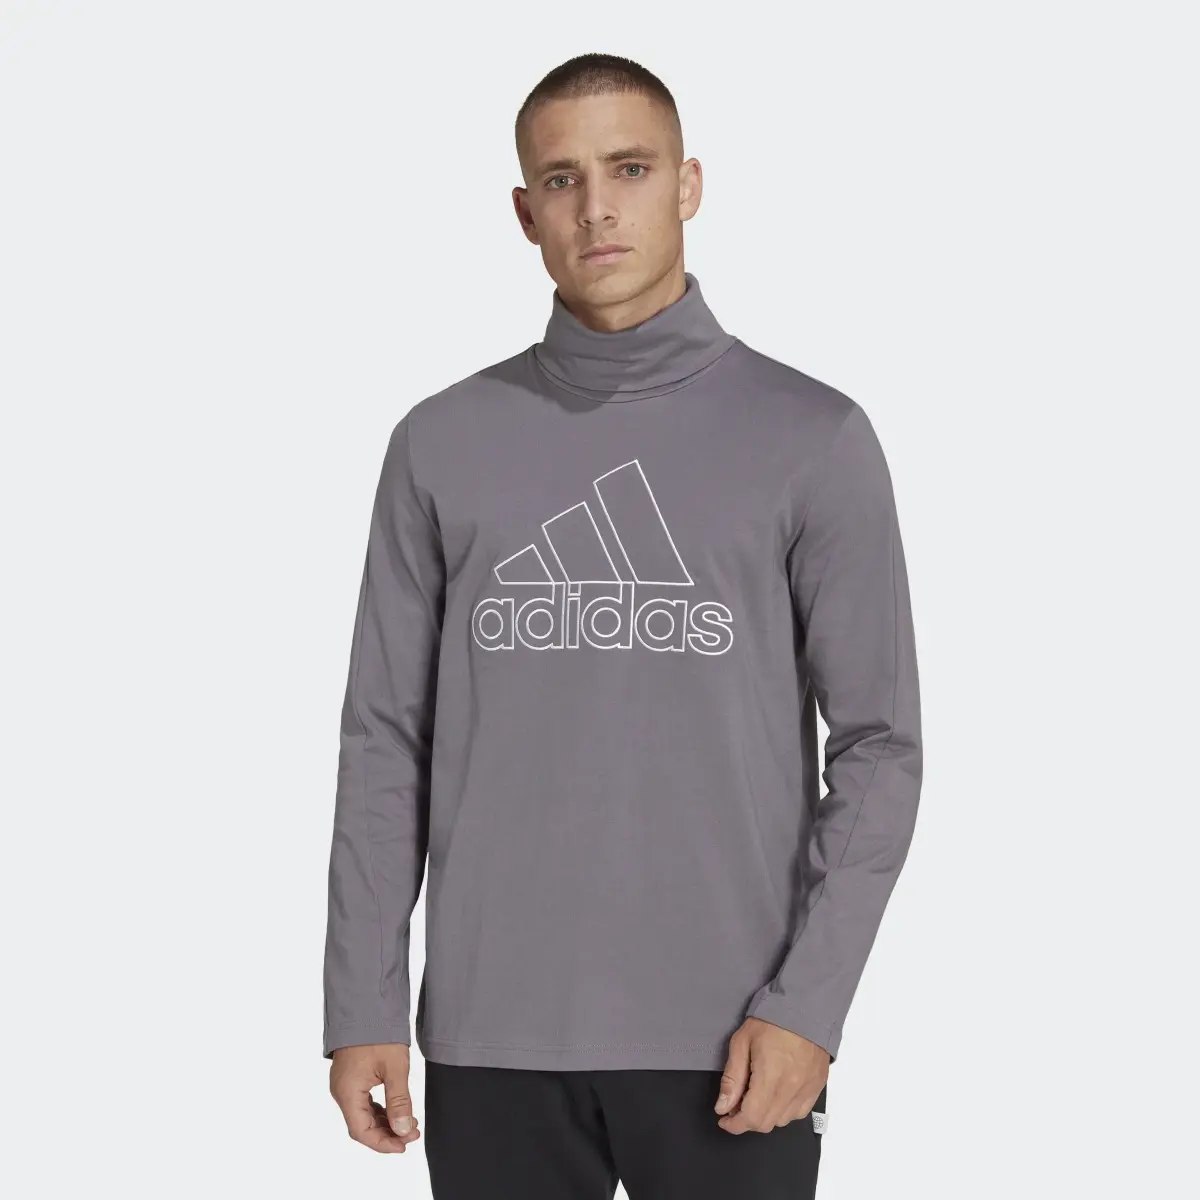 Adidas Future Icons Embroidered Badge of Sport Long-Sleeve Top. 2